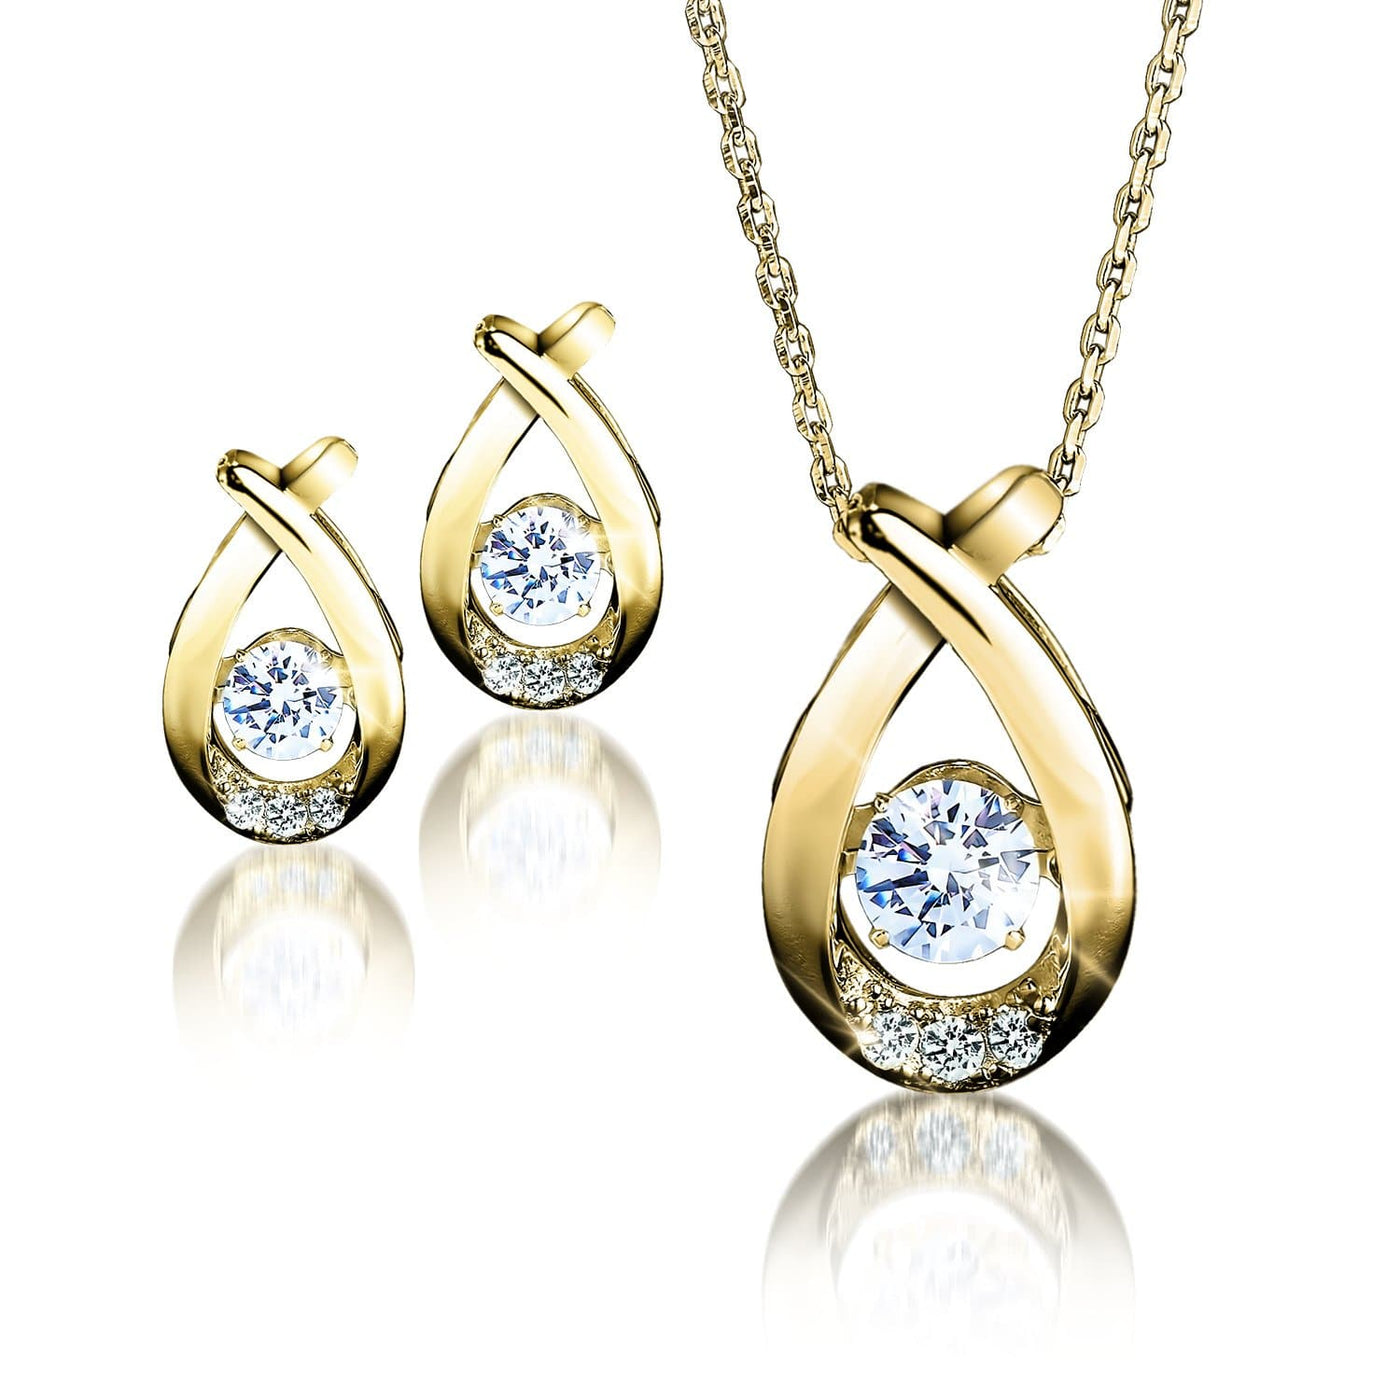 Daniel Steiger 'Dancing' Jewelry Gold Collection